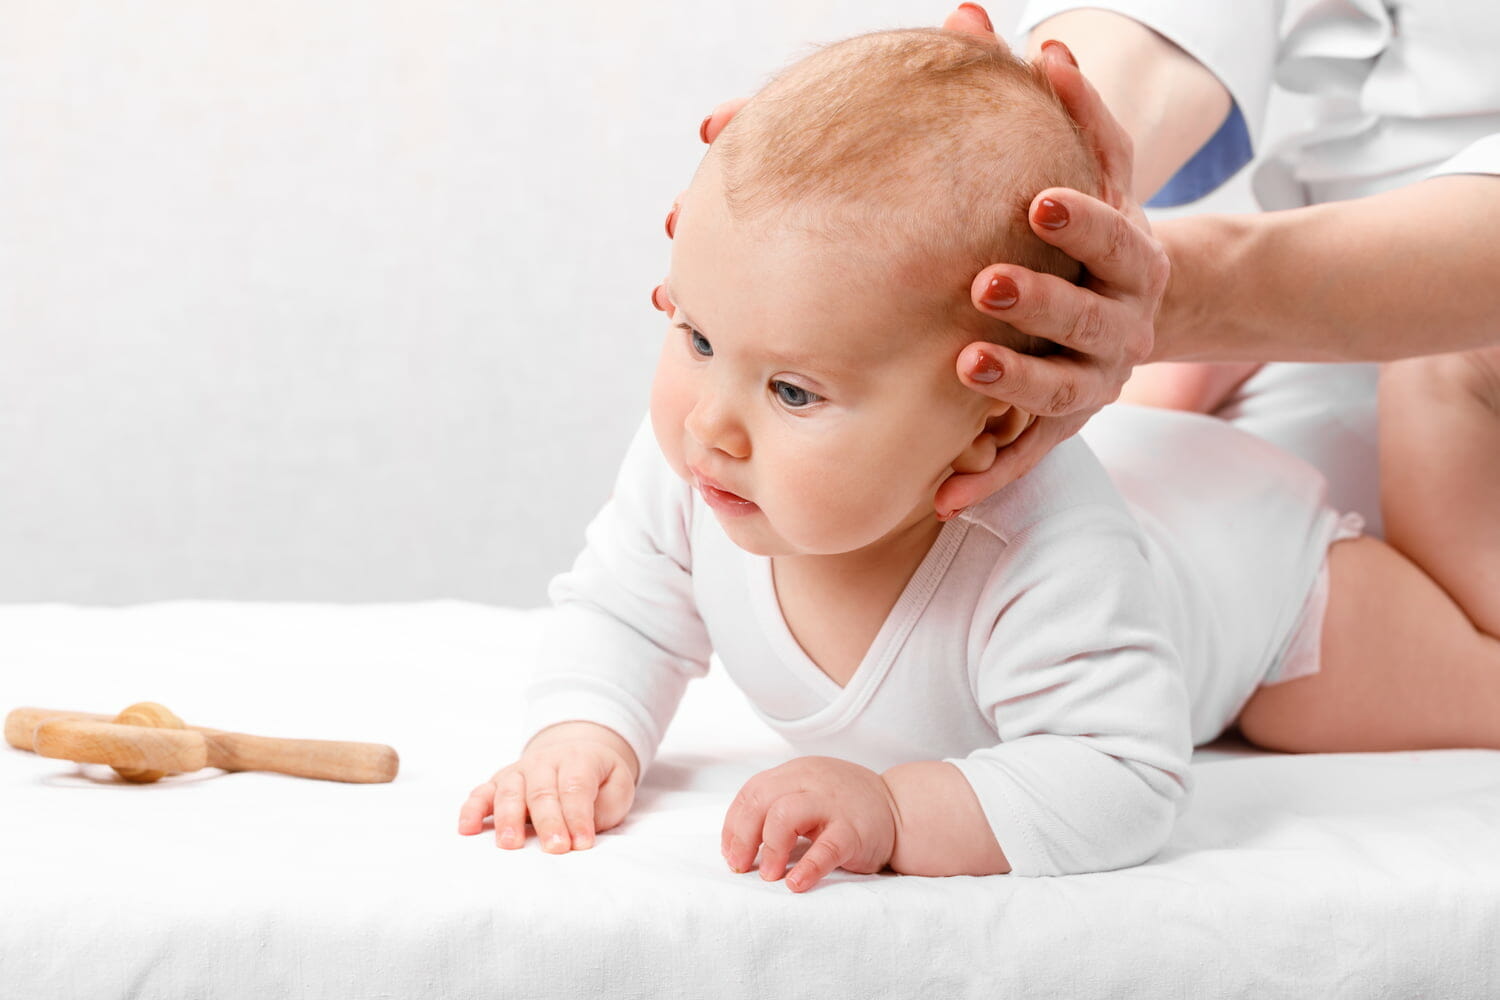 A baby crawling whilst a doctor examines its head